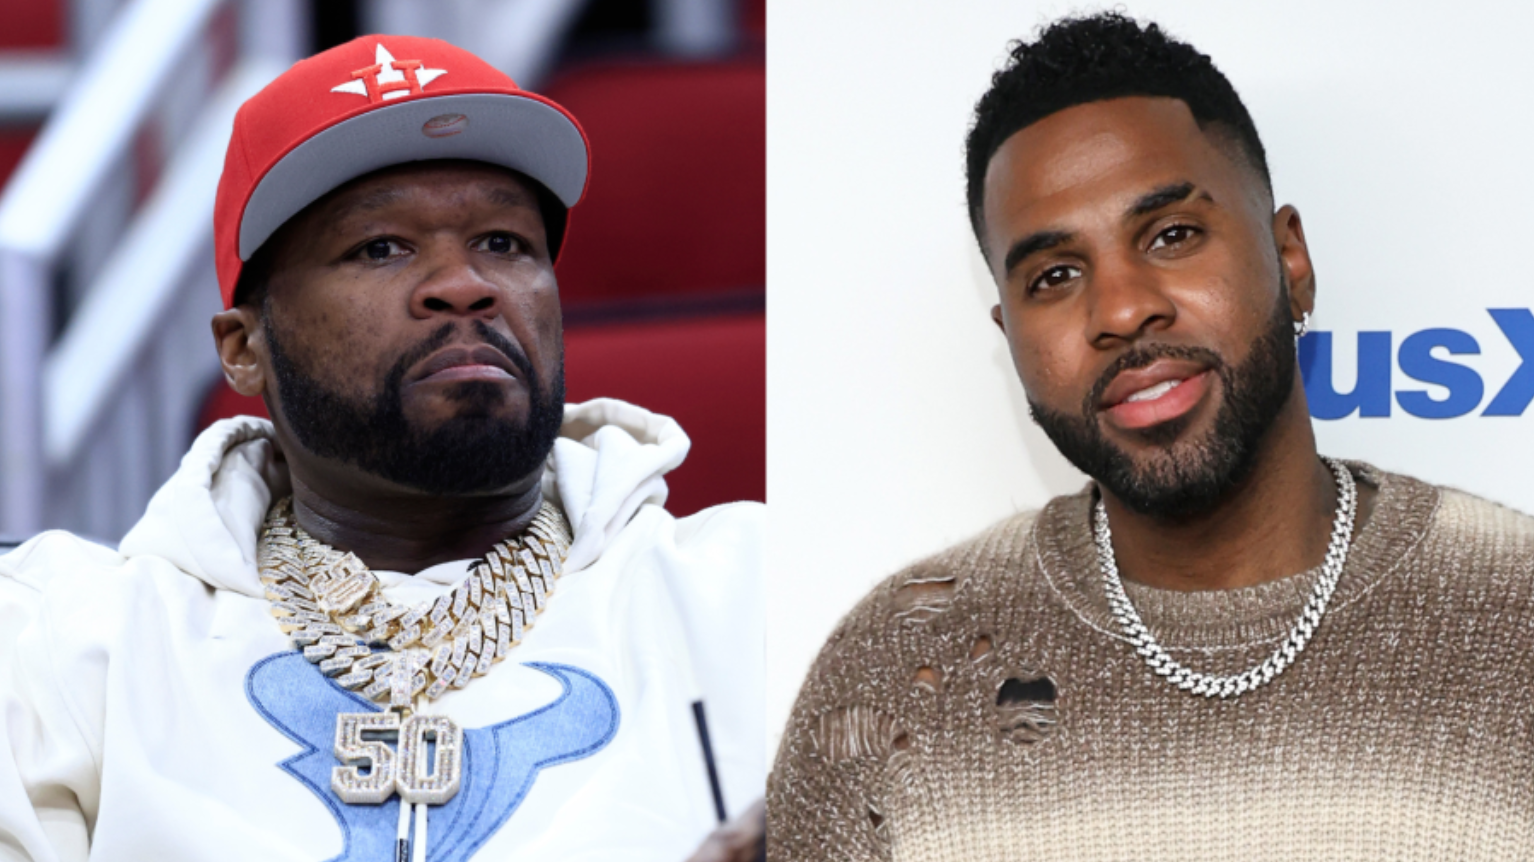 50 Cent Warns Jason Derulo To “Shut The F**K Up” Amid His Trolling Of Diddy